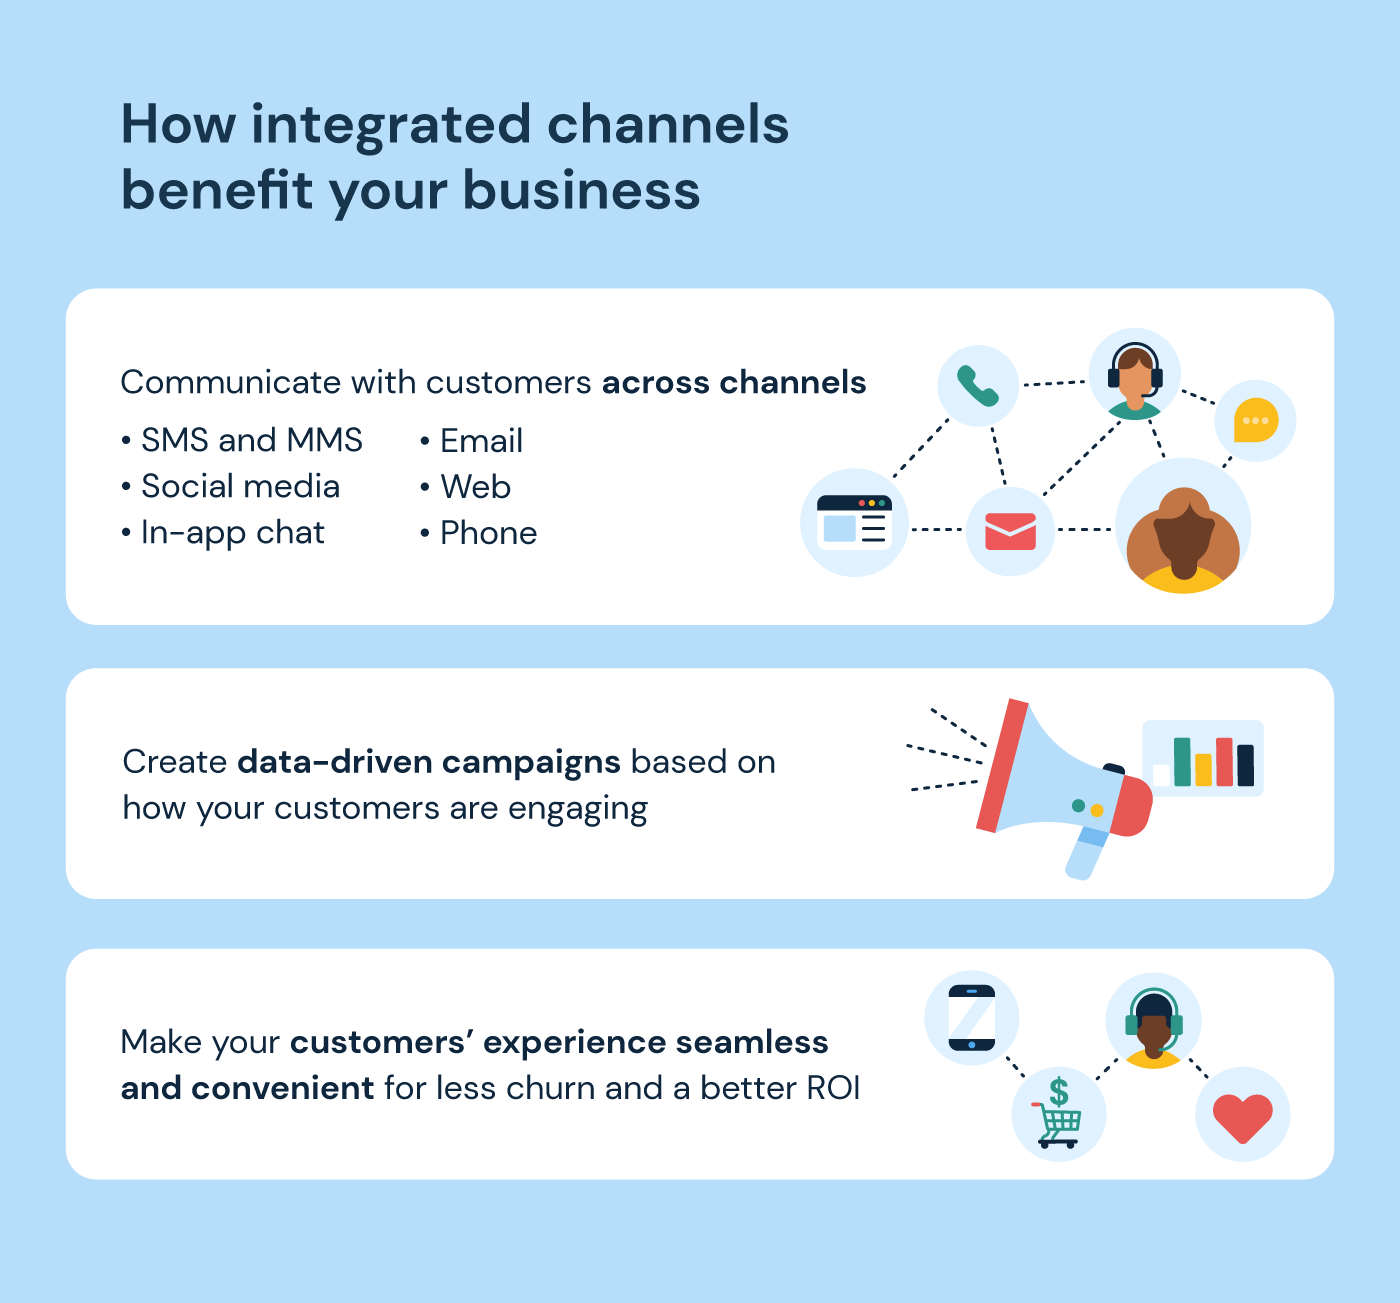 Business benefits of integrated channels